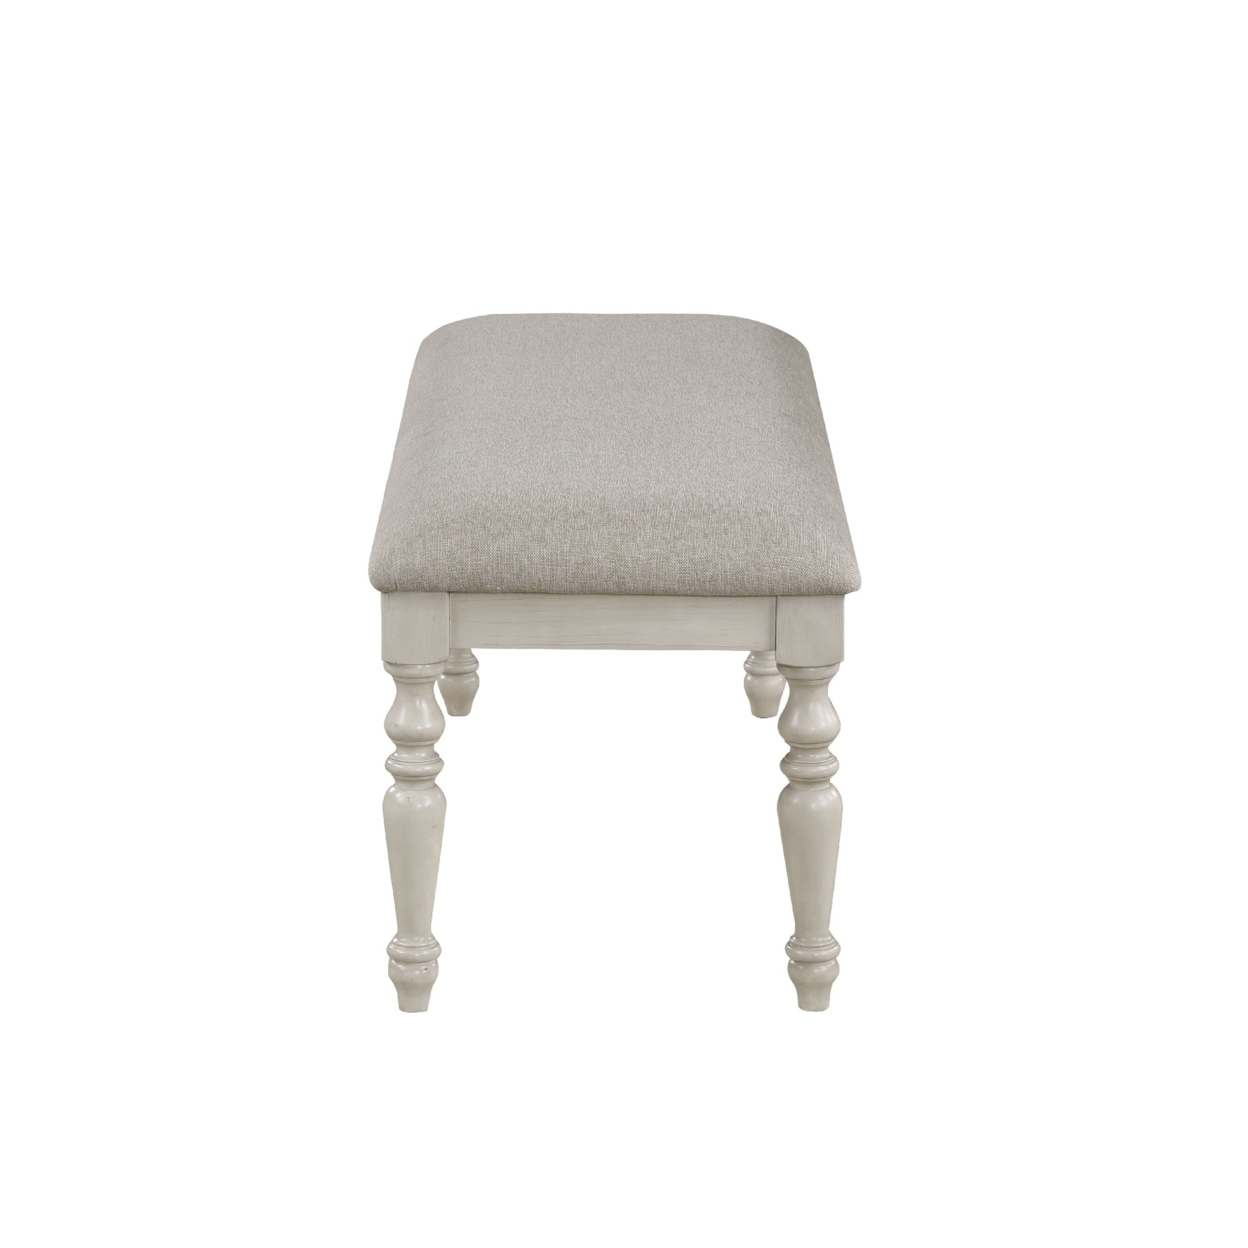 Katherine 48 Inch Bench With Fabric Seat And Turned Legs, White- Saltoro Sherpi